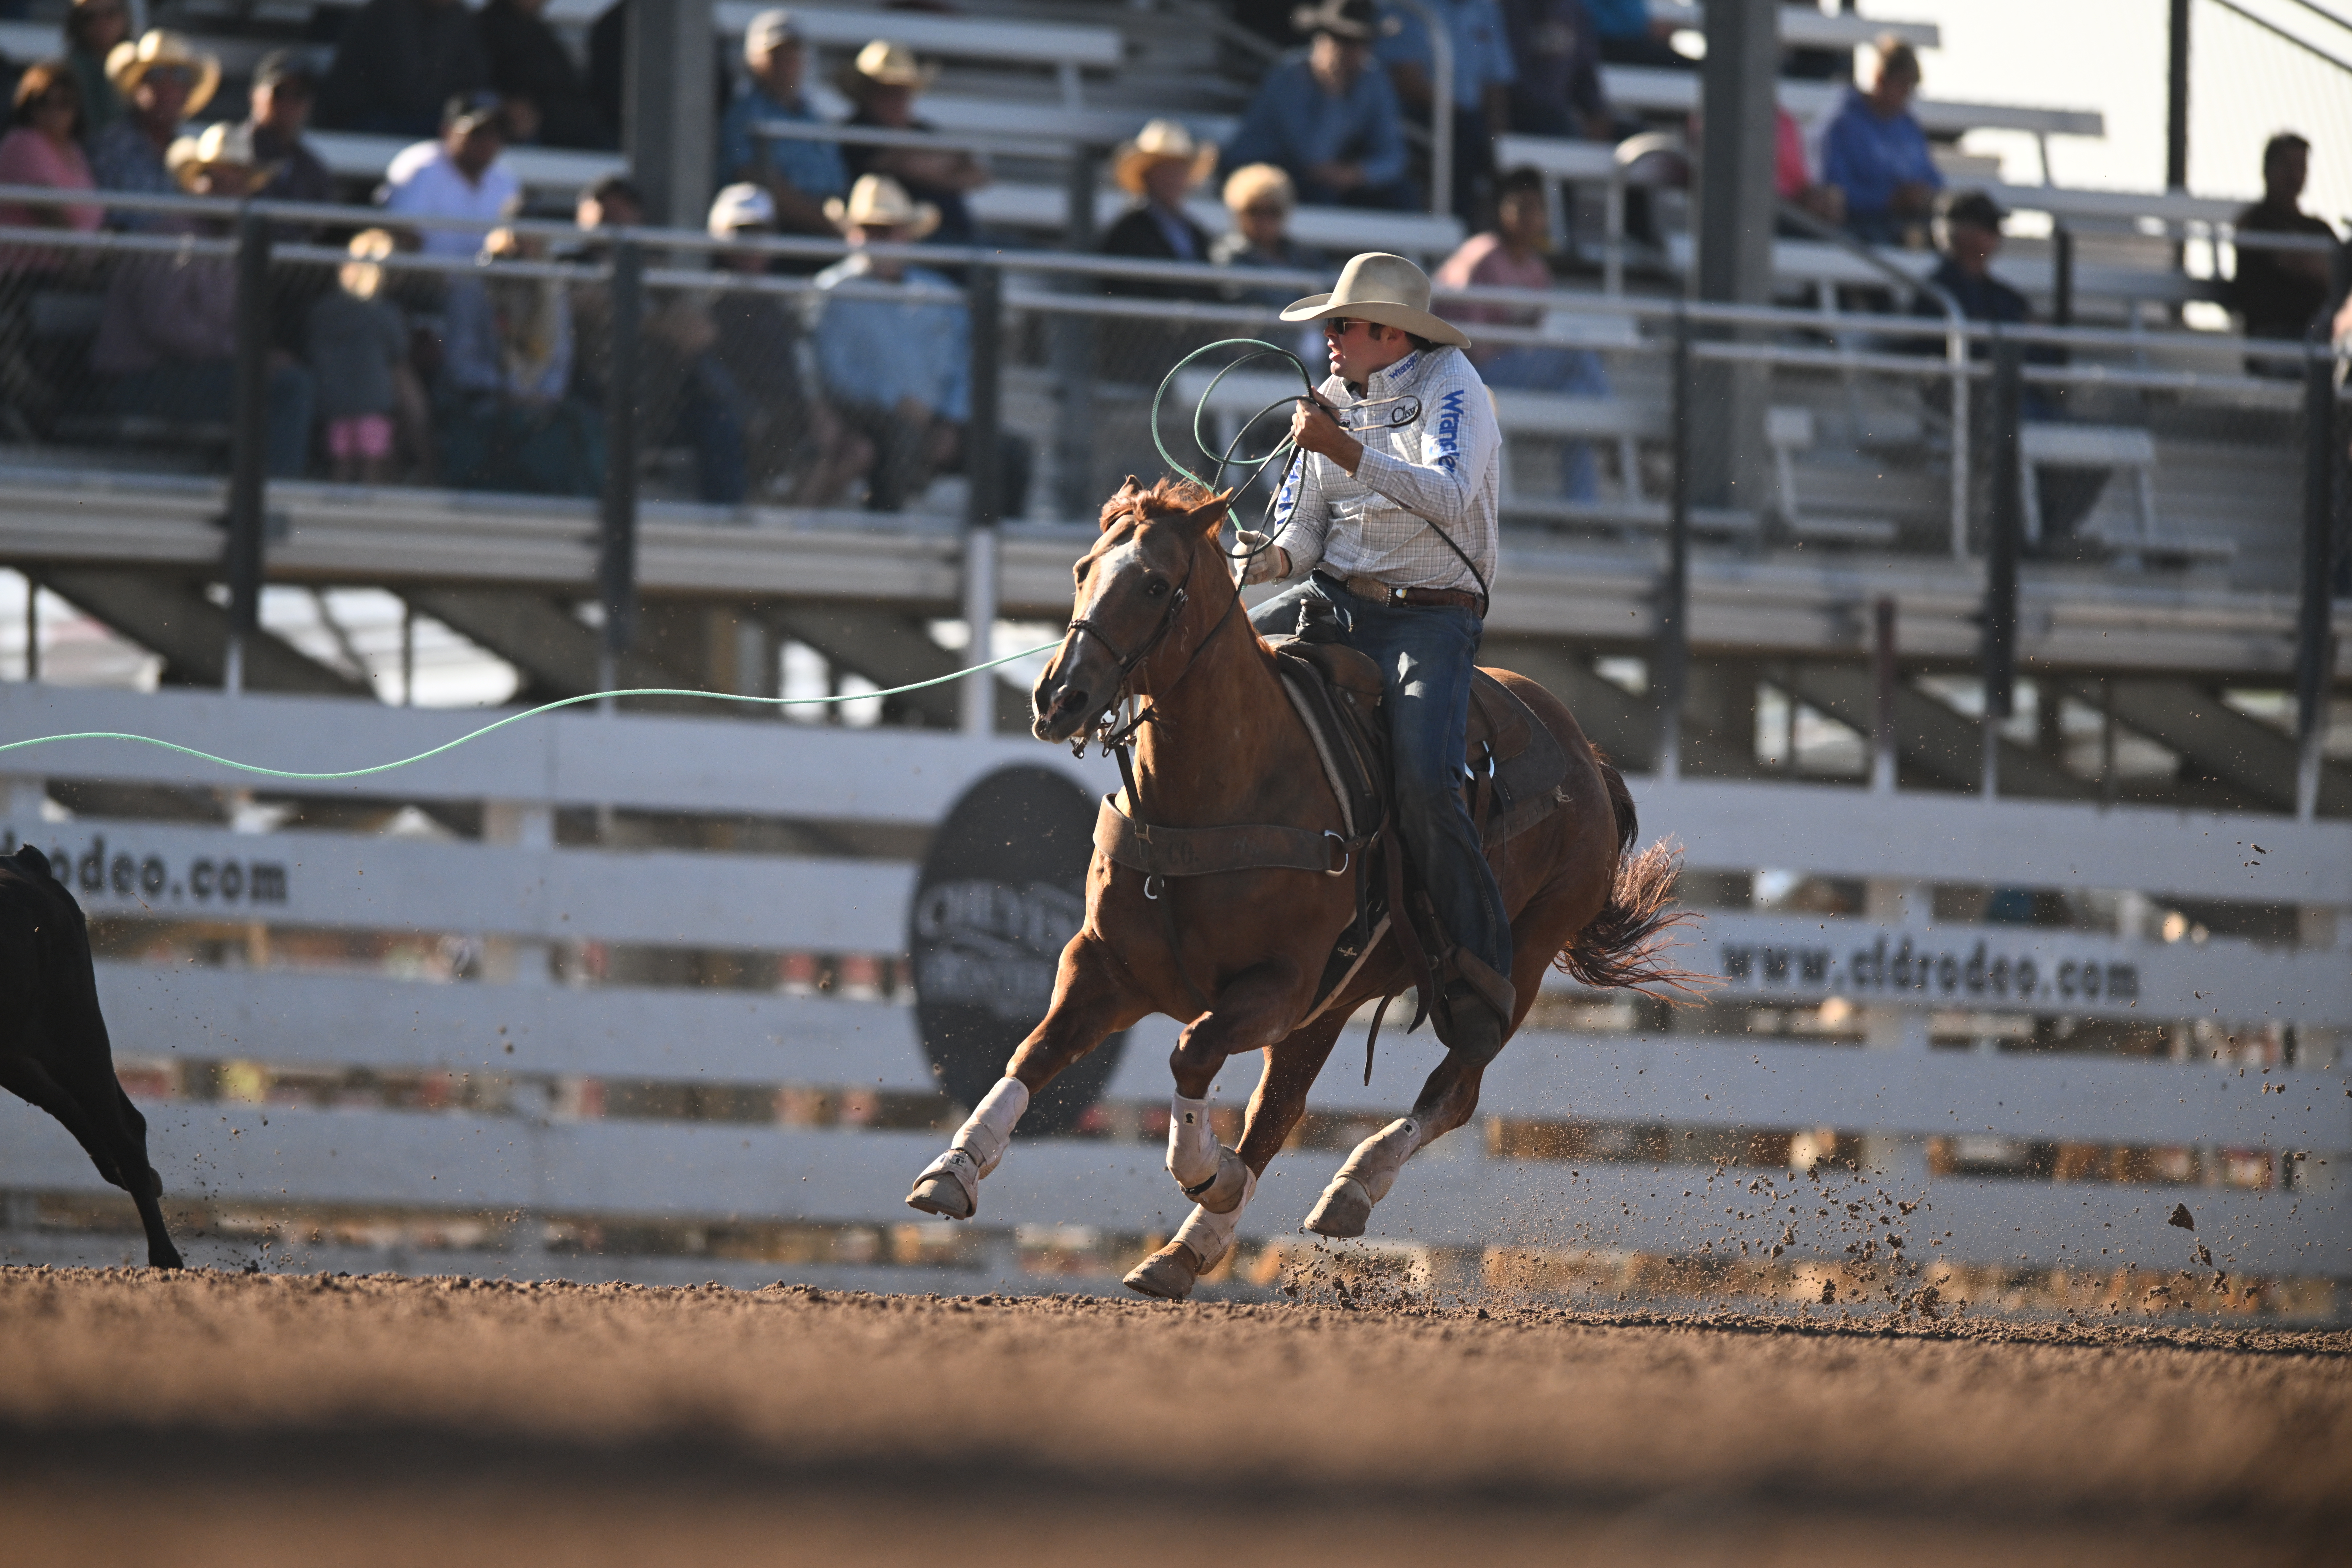 Jake Clay heading a steer at the 2023 Cheyenne Frontier Days.